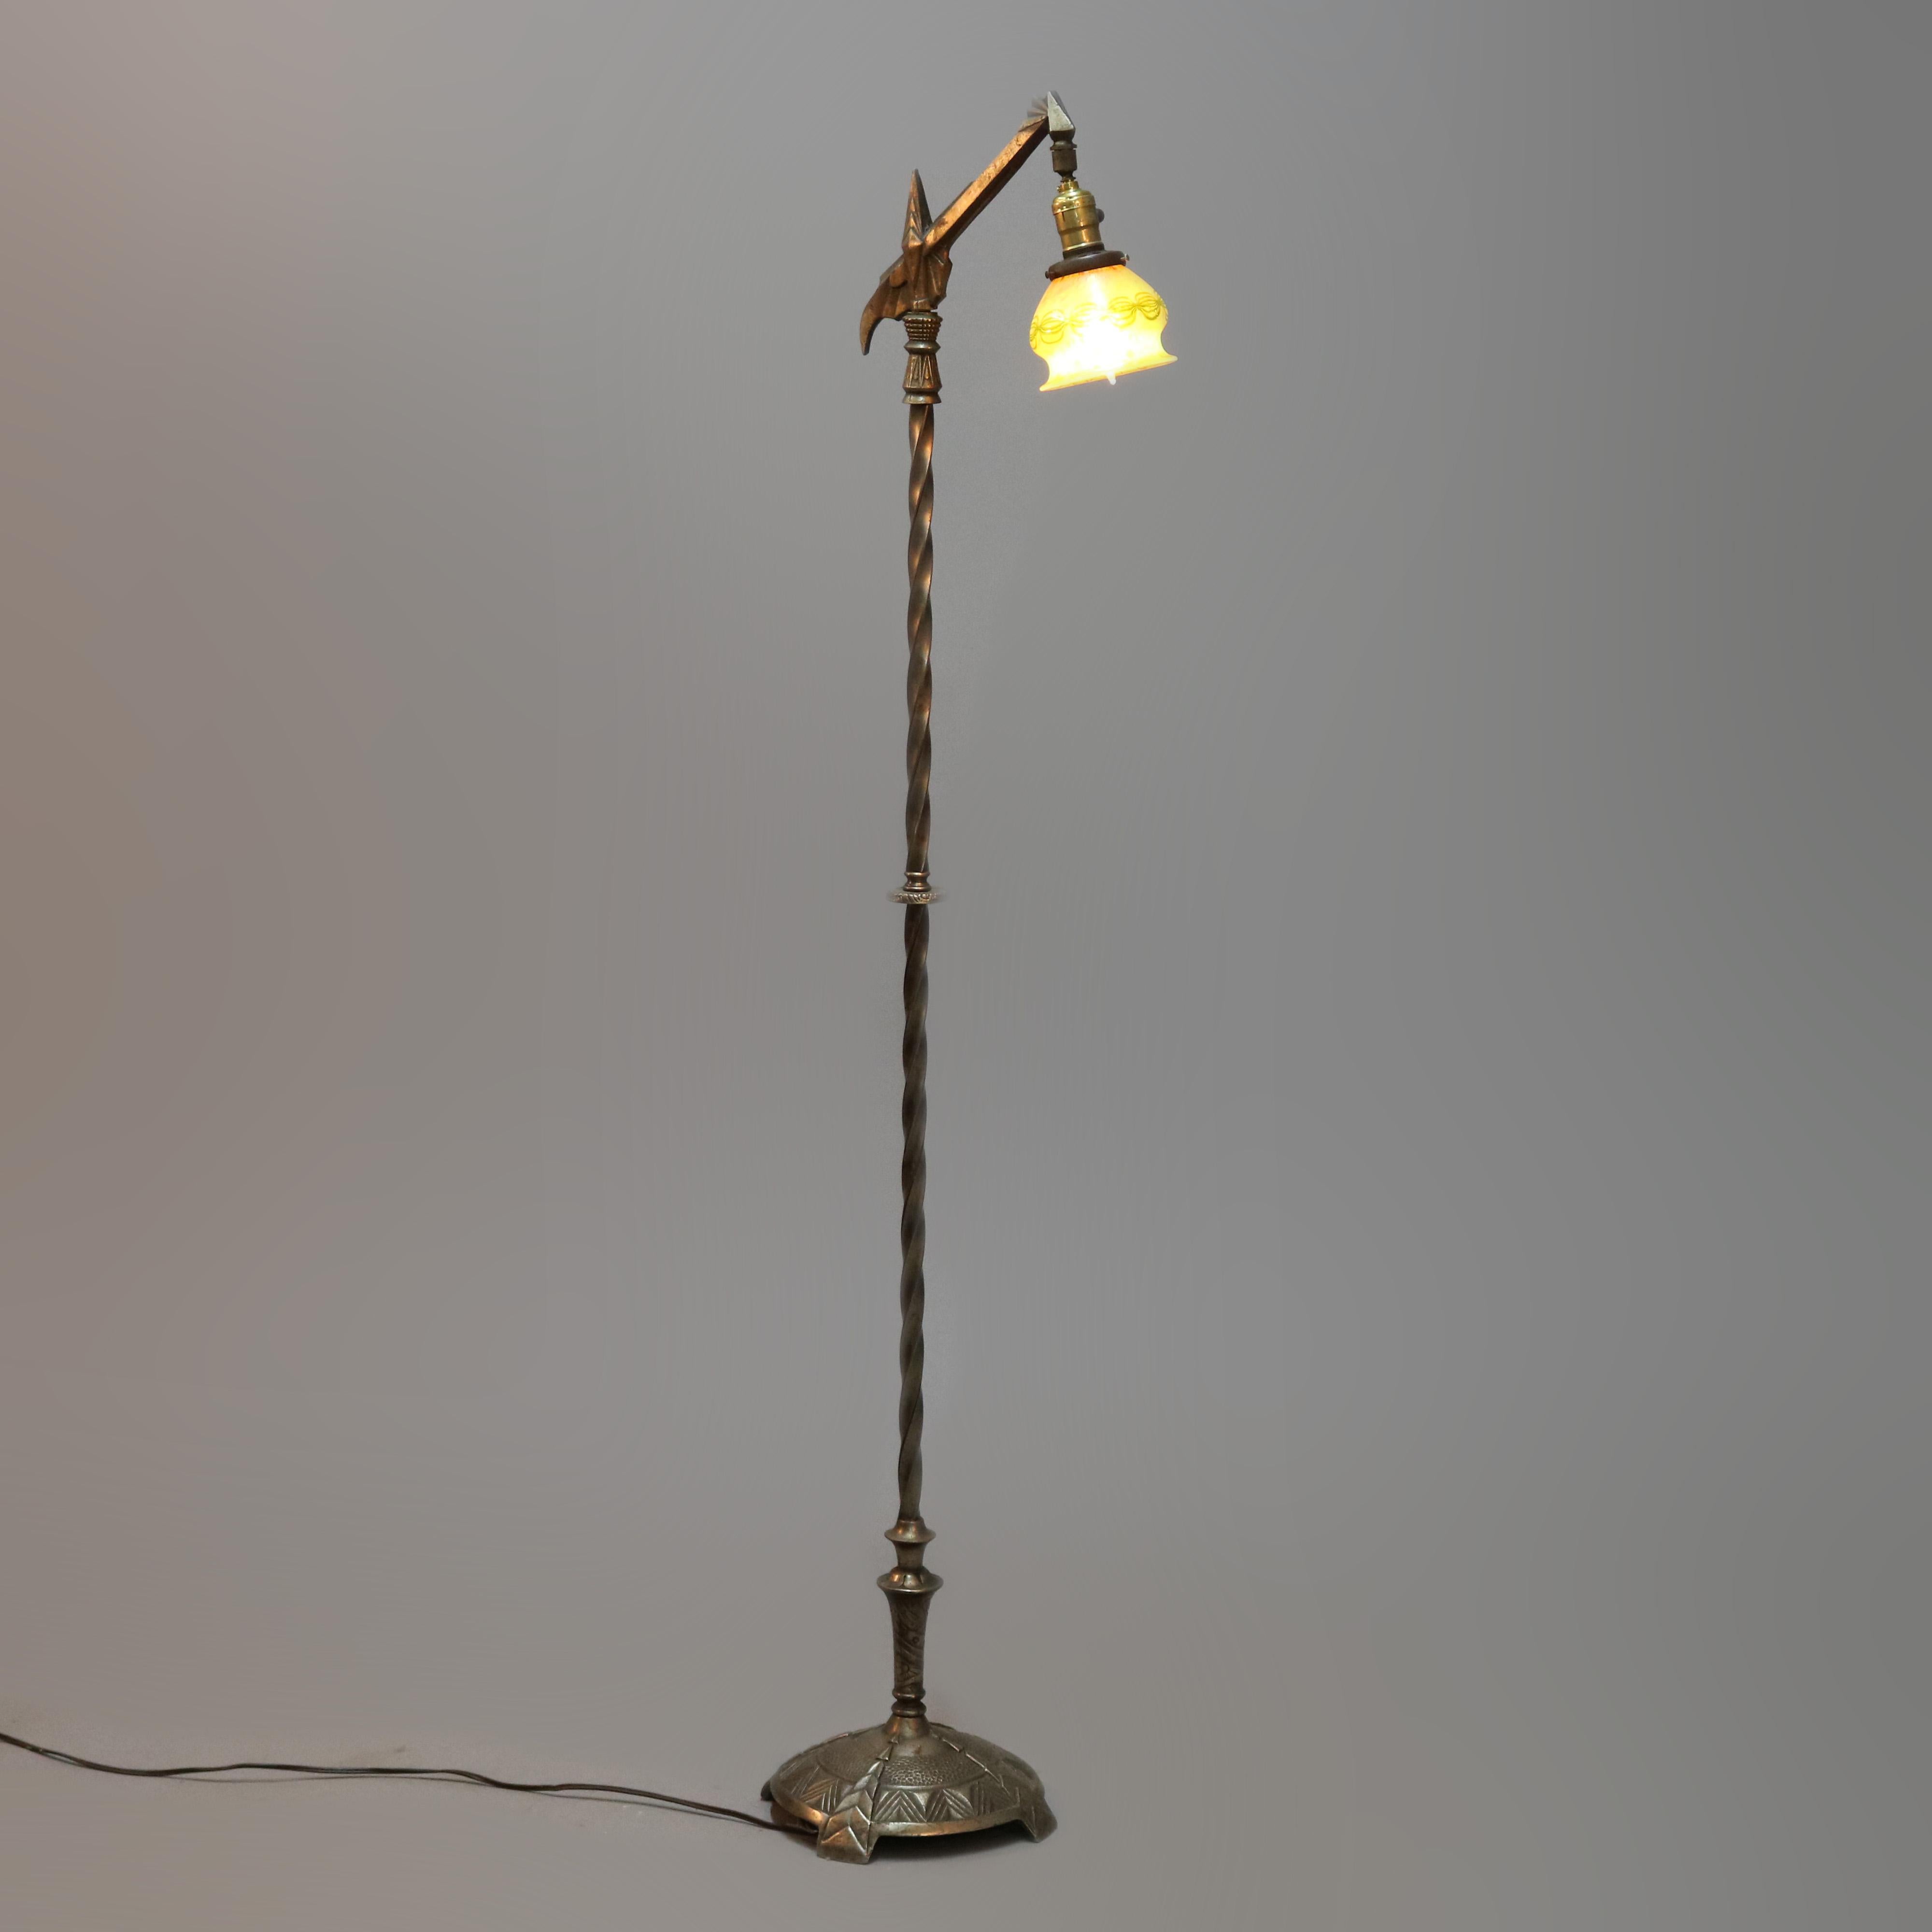 An antique Arts & Crafts goose neck floor lamp in the manner of Rembrandt offers twisted column on footed base and with art glass shade in the manner of Steuben, circa 1910.

Measures: 58.5